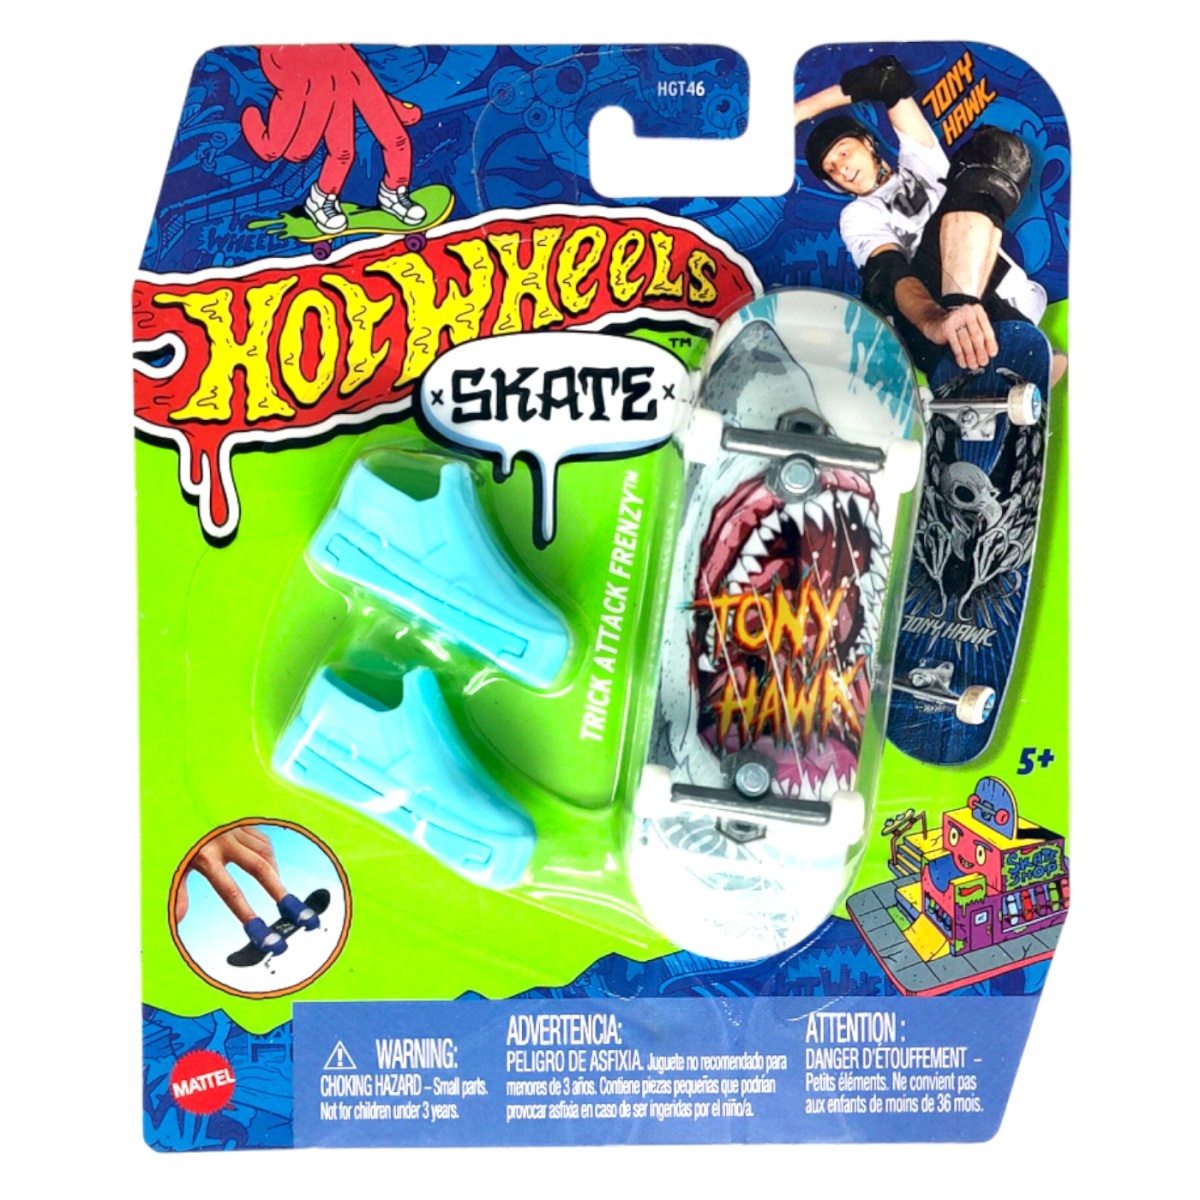 Trick Attack Frenzy Hot Wheels Skate Fingerboard and Shoes – Square Imports